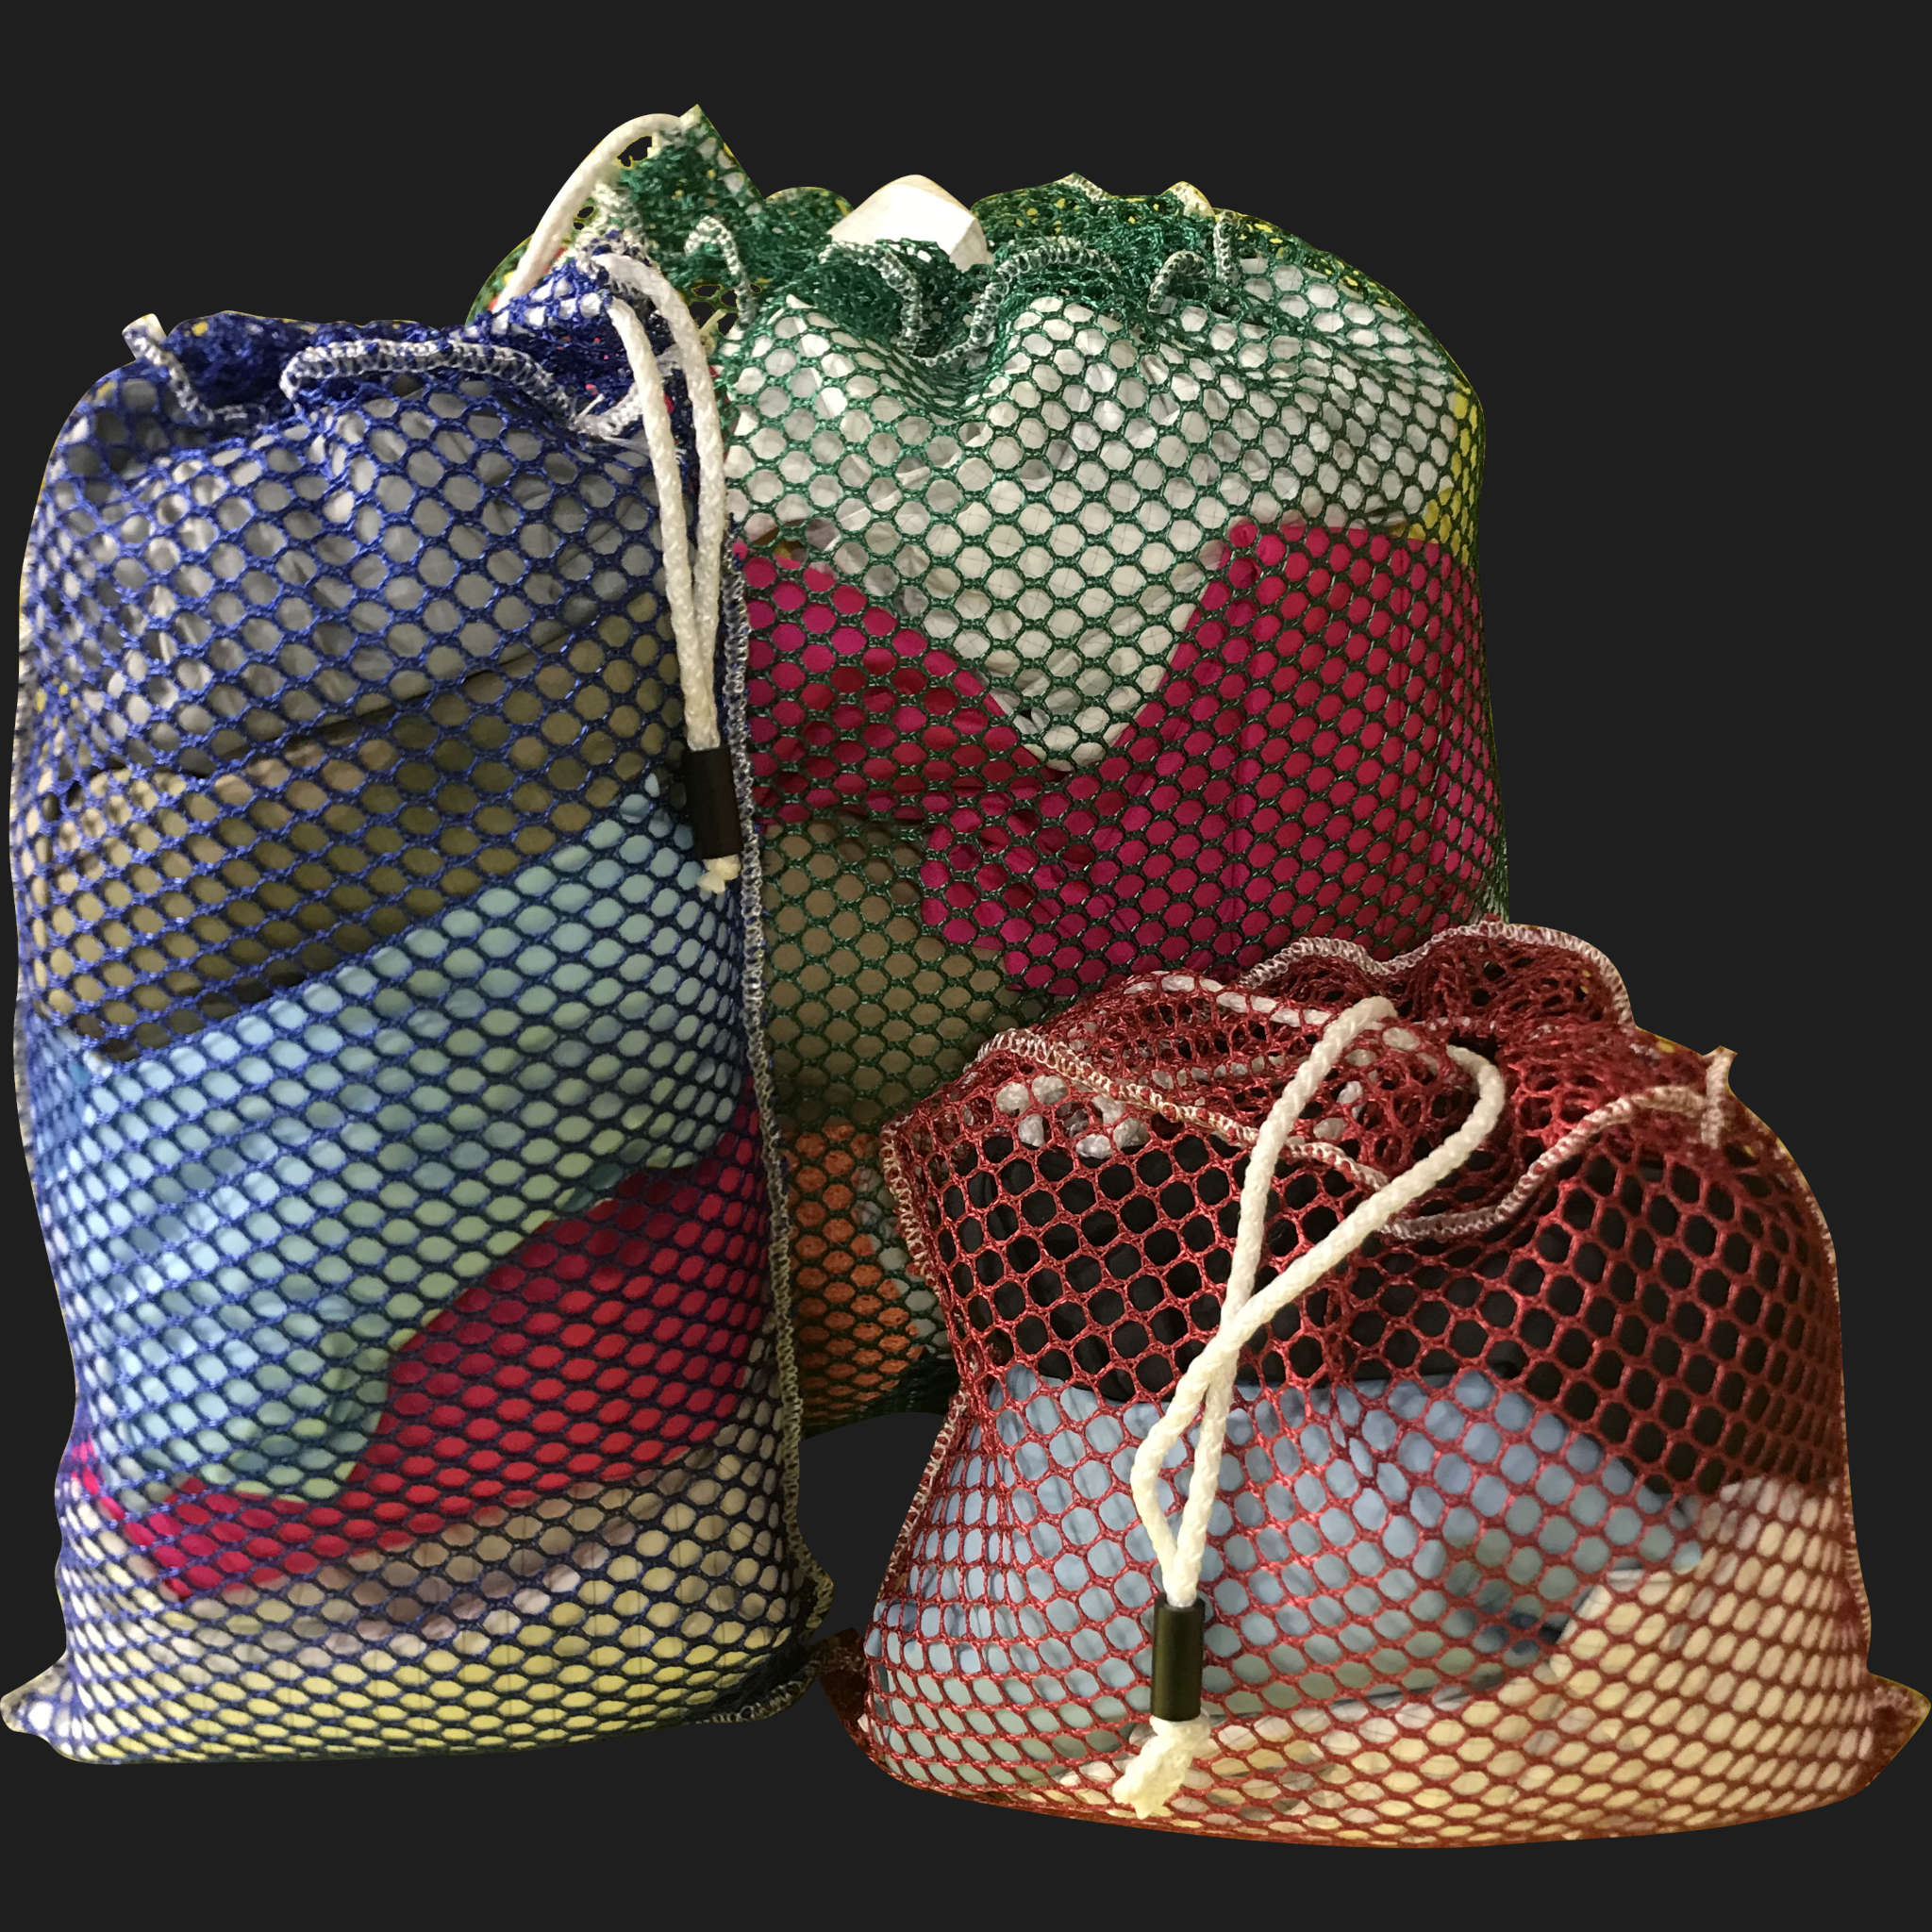 16" x 30" Customized Mesh-Net-Laundry Bags Heavy Duty with Cord and barrellock closure